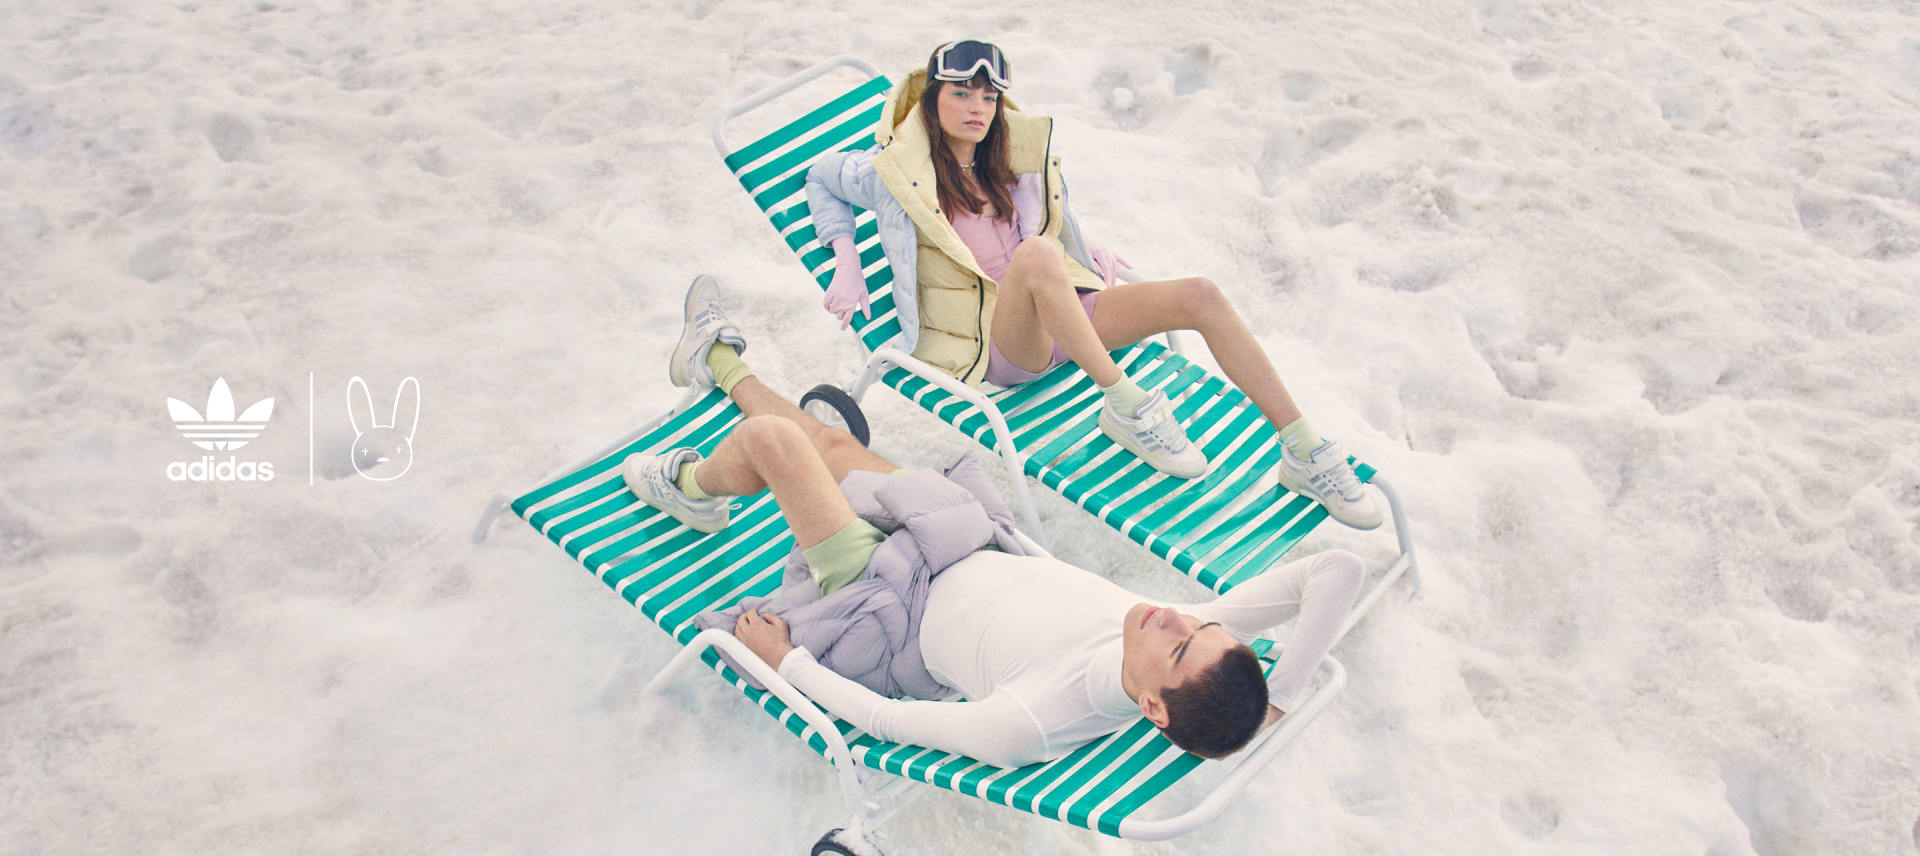 Two models laying on deck chairs in the snow, wearing the Bad Bunny White Forums.